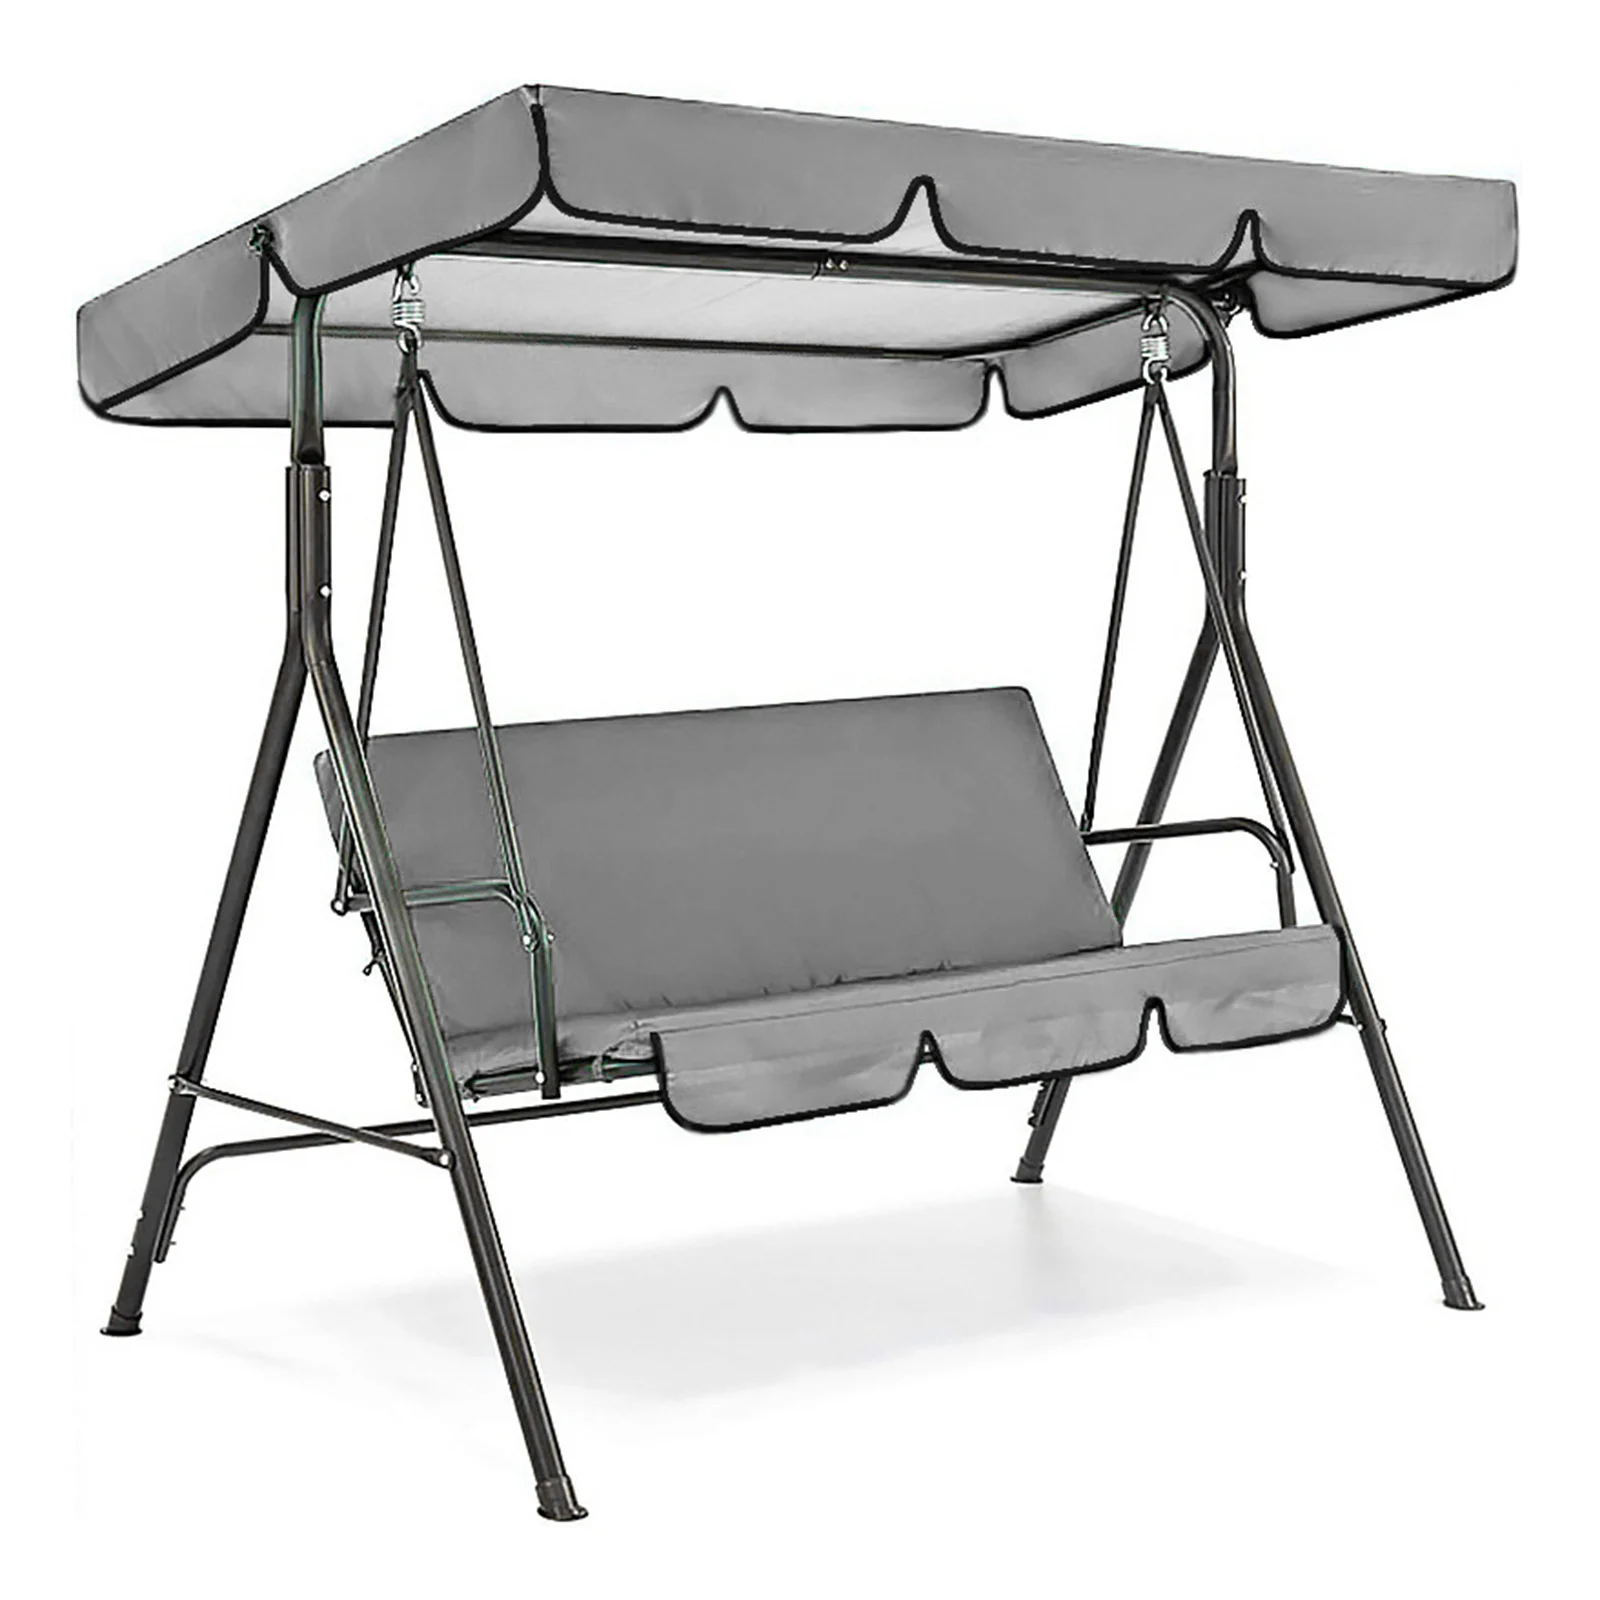 Swing Awning Set 3 Seat Swing Canopies Seat Cover Protector Waterproof